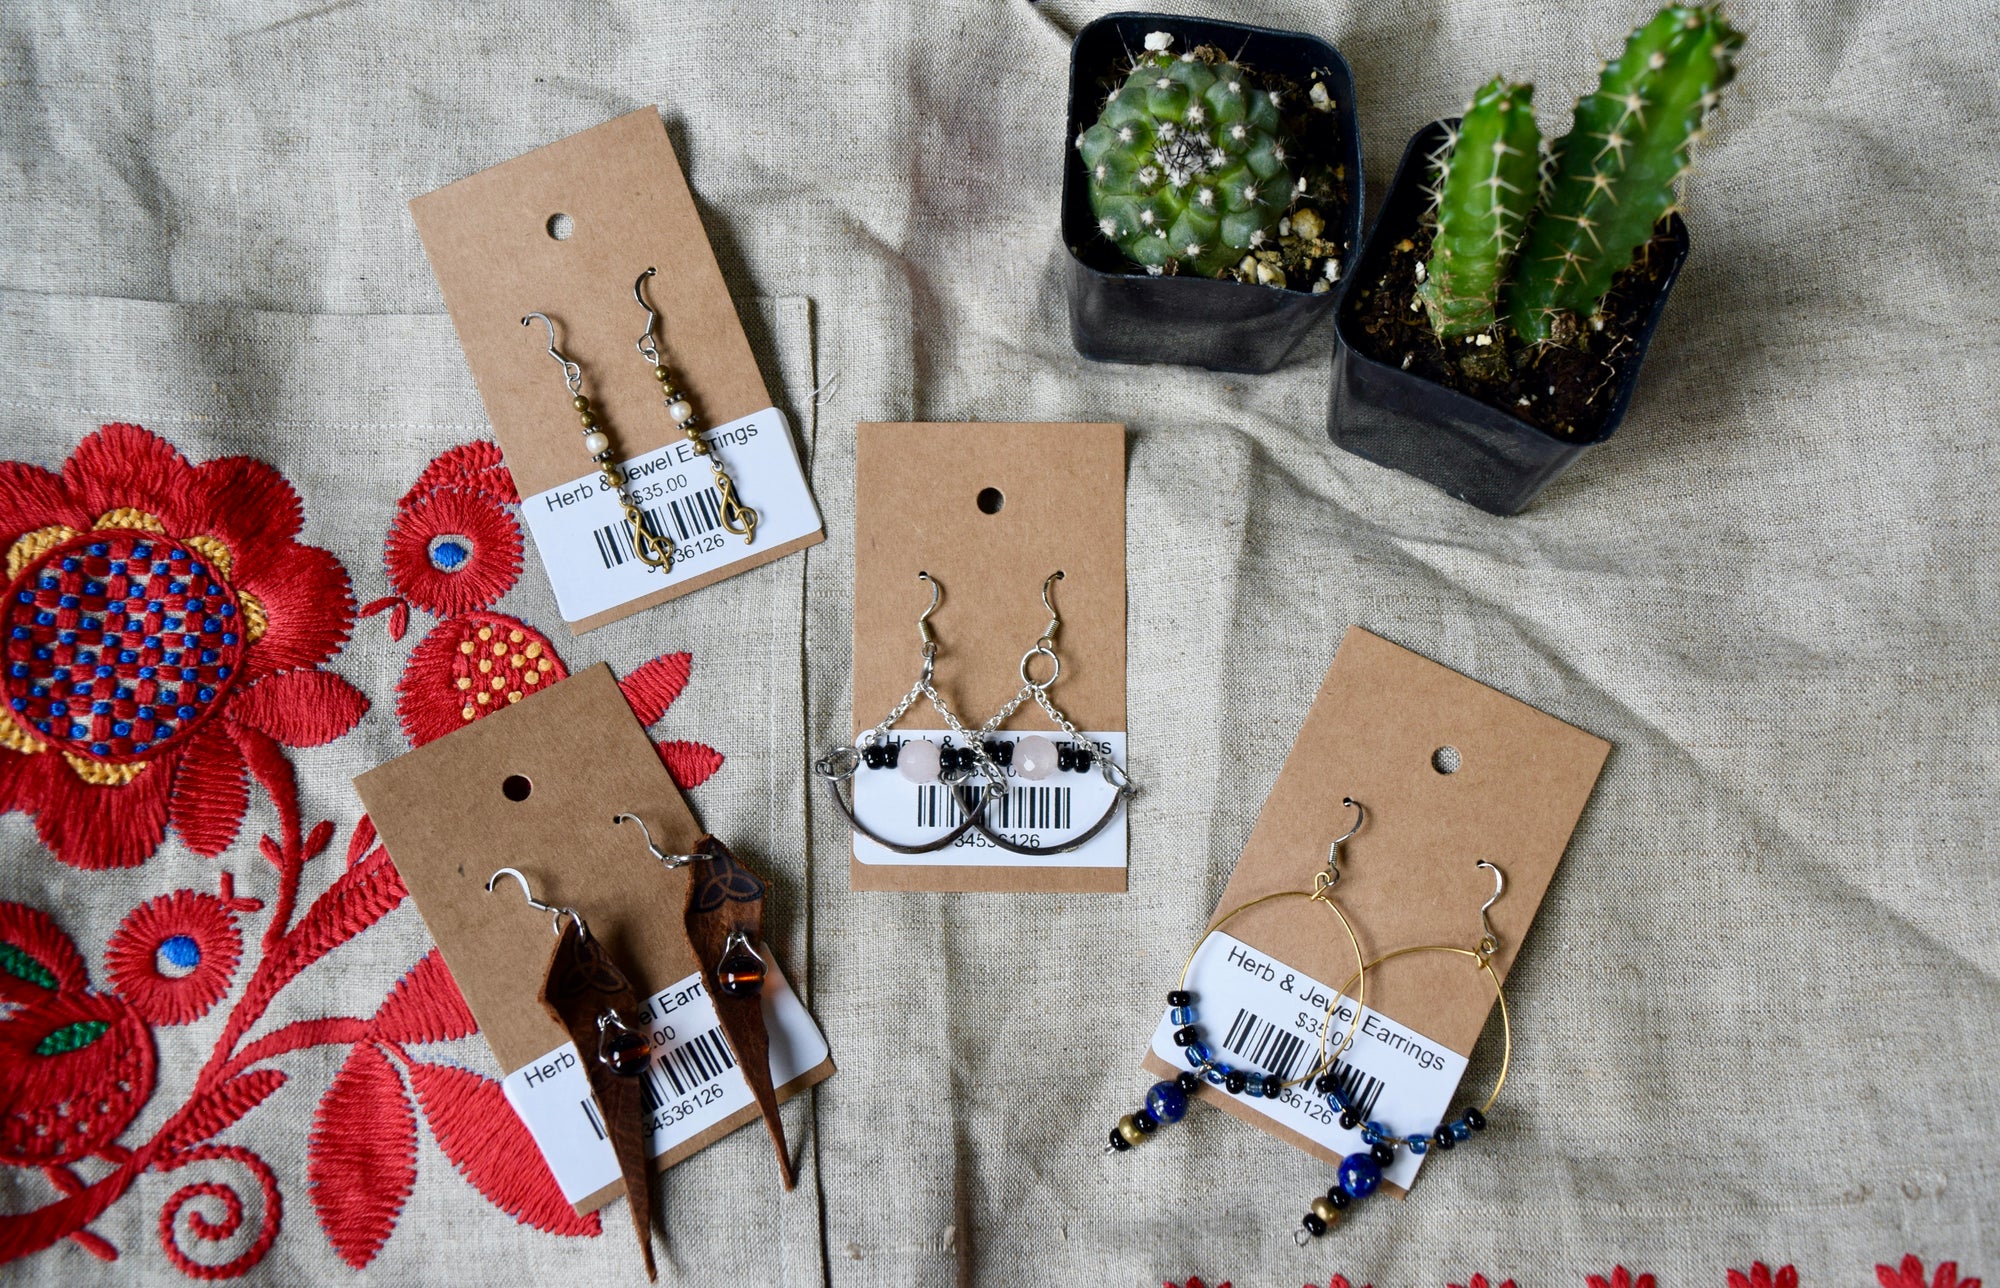 Several different pairs of earrings next to 2 small green cacti. The earrings range from hanging to hoops and all have beads of varying colors. Each has gold or silver metal.